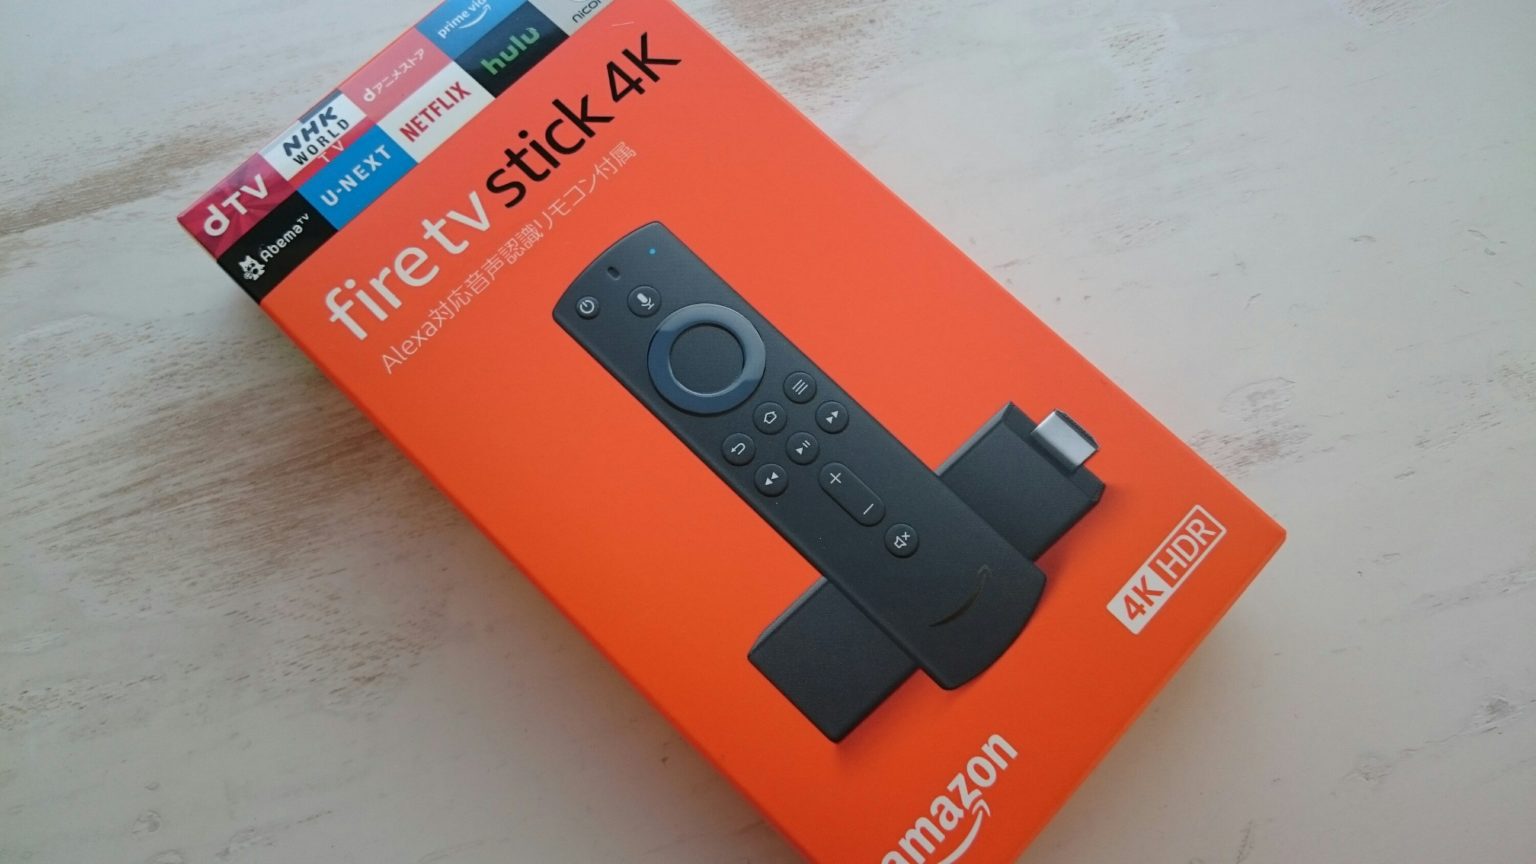 Fire TV Stick 3 & Stick Lite share the same model number and are